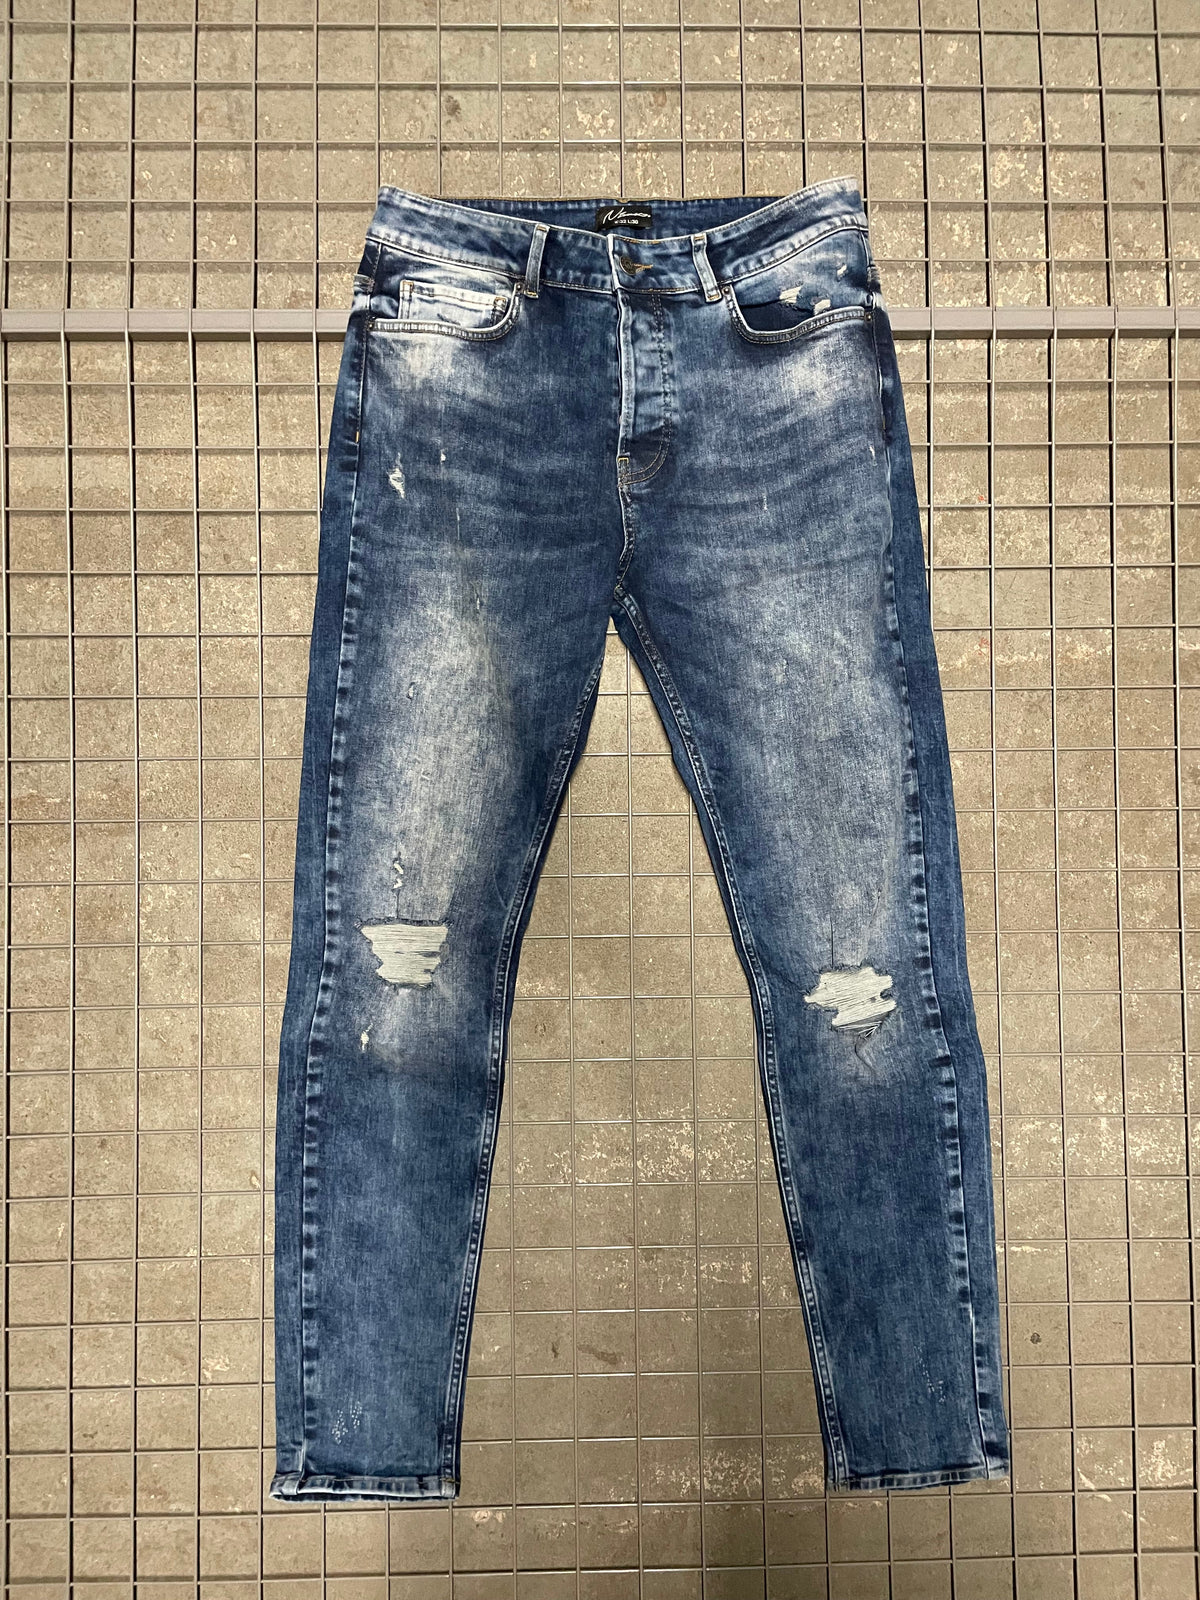 Slim Jeans - Blue Wash Ripped 32R (SAMPLE)